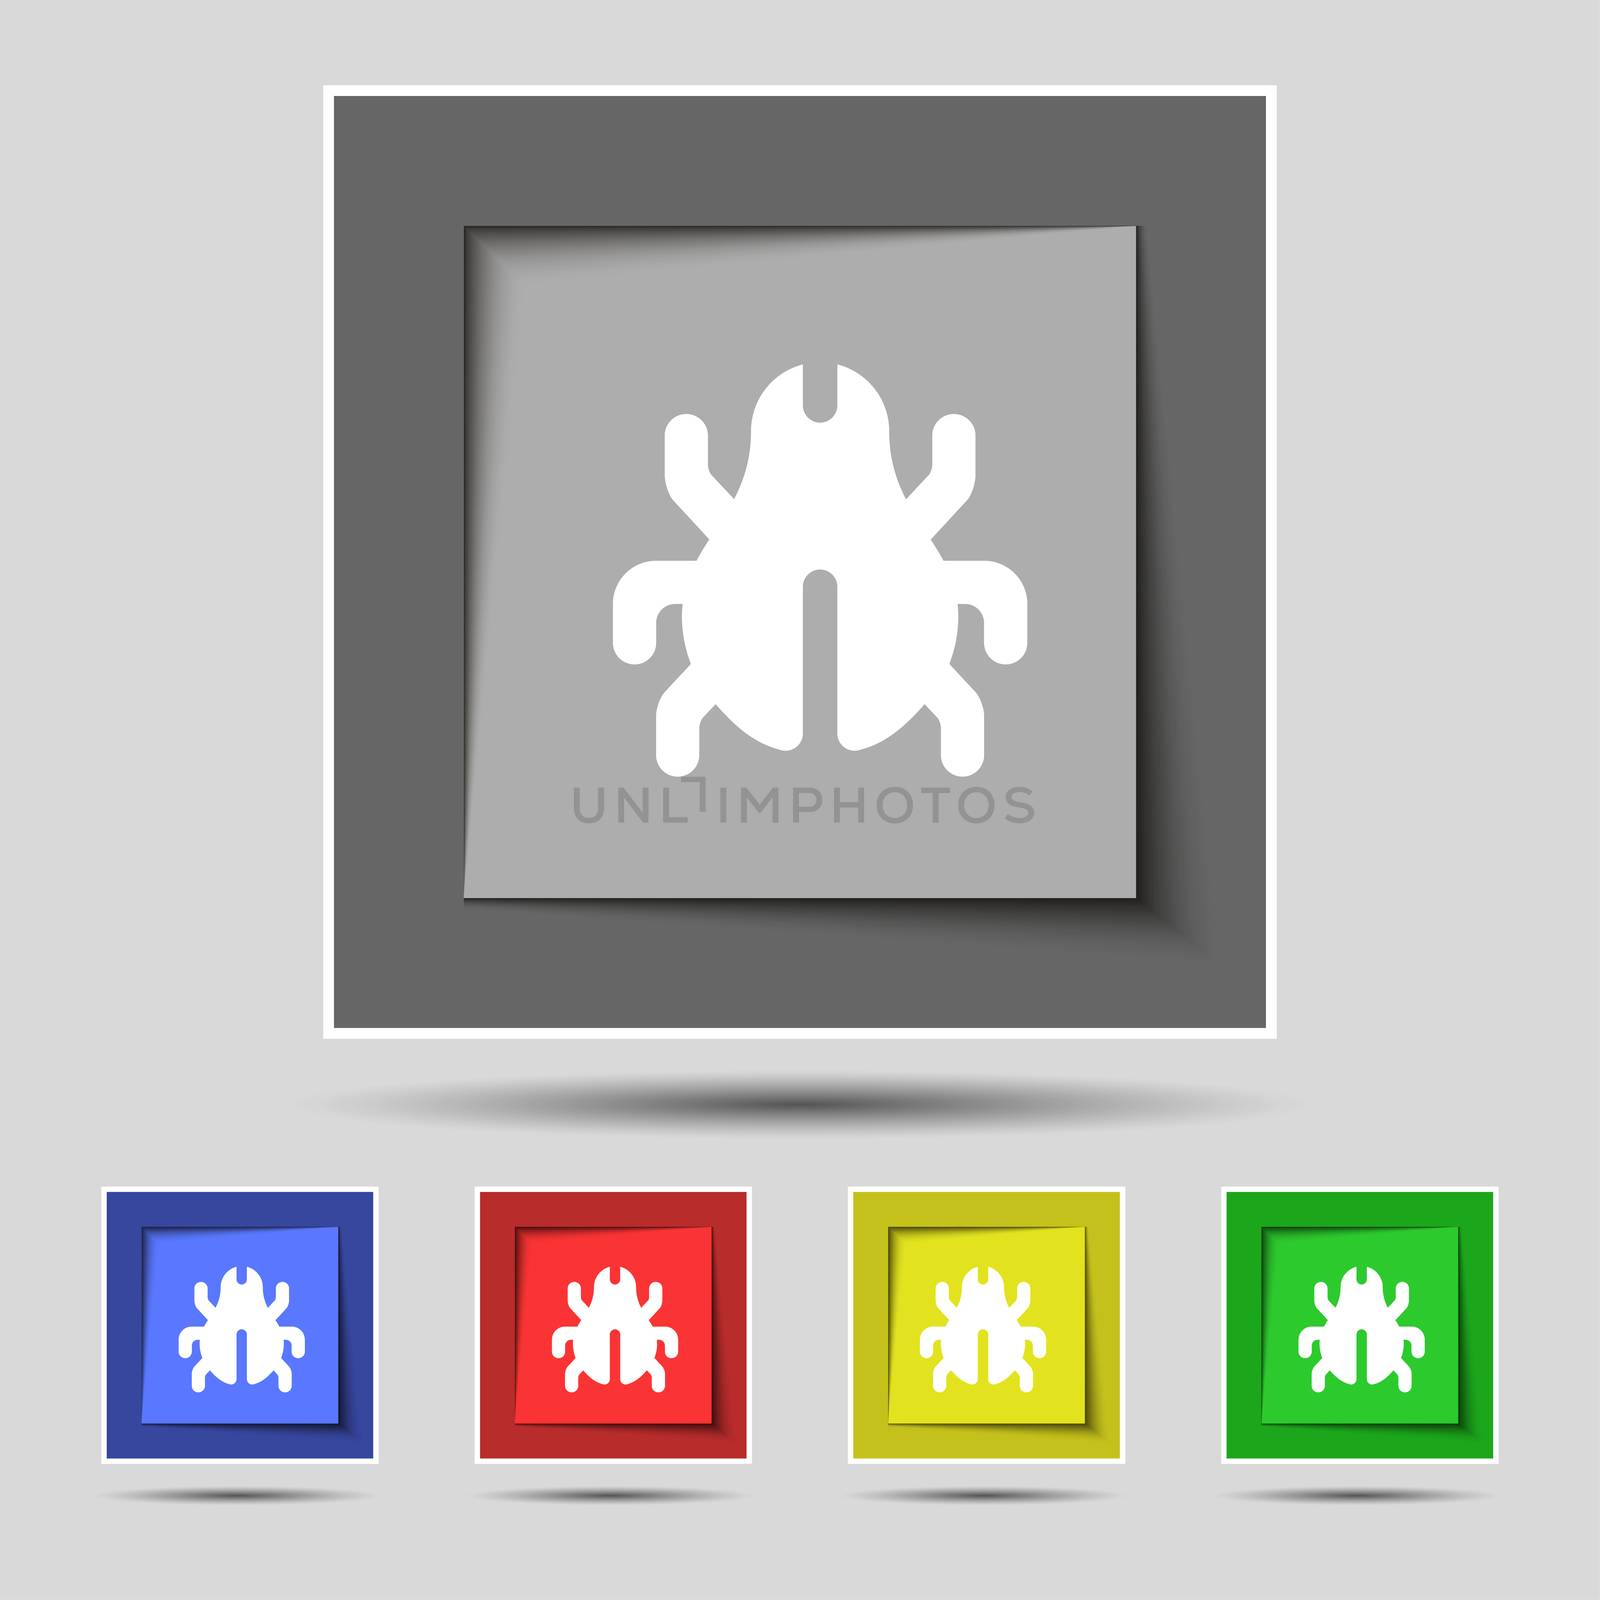 Software Bug, Virus, Disinfection, beetle icon sign on the original five colored buttons. illustration